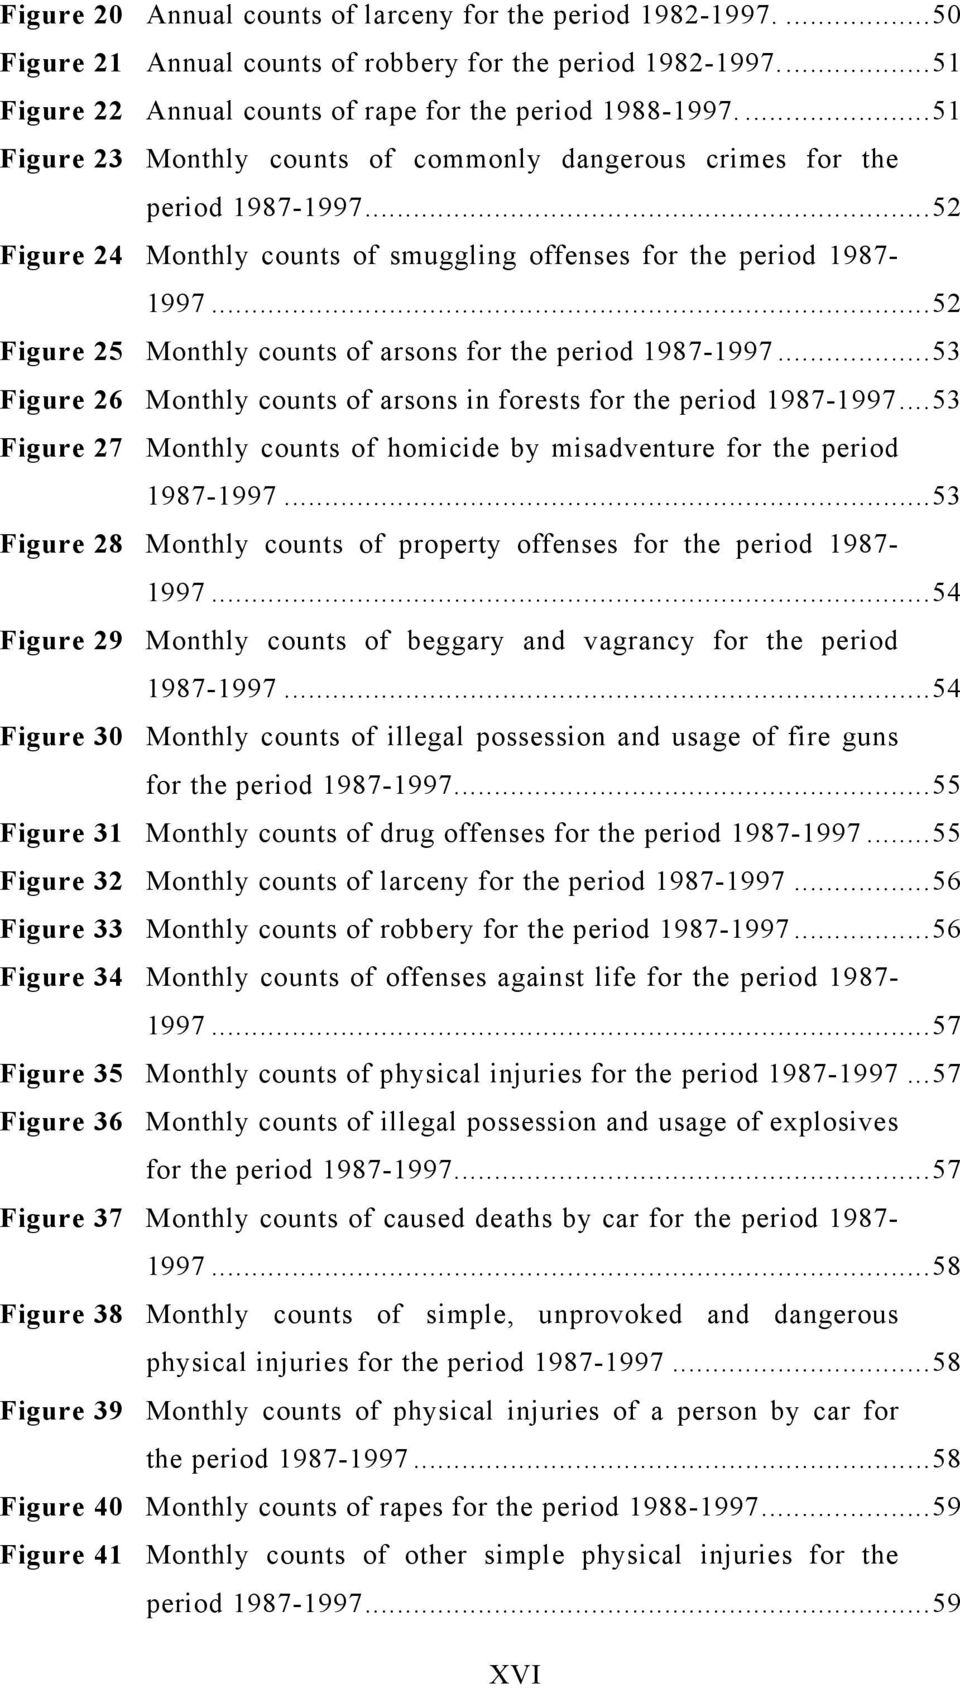 ..52 Figure 25 Monthly counts of arsons for the period 1987-1997...53 Figure 26 Monthly counts of arsons in forests for the period 1987-1997.